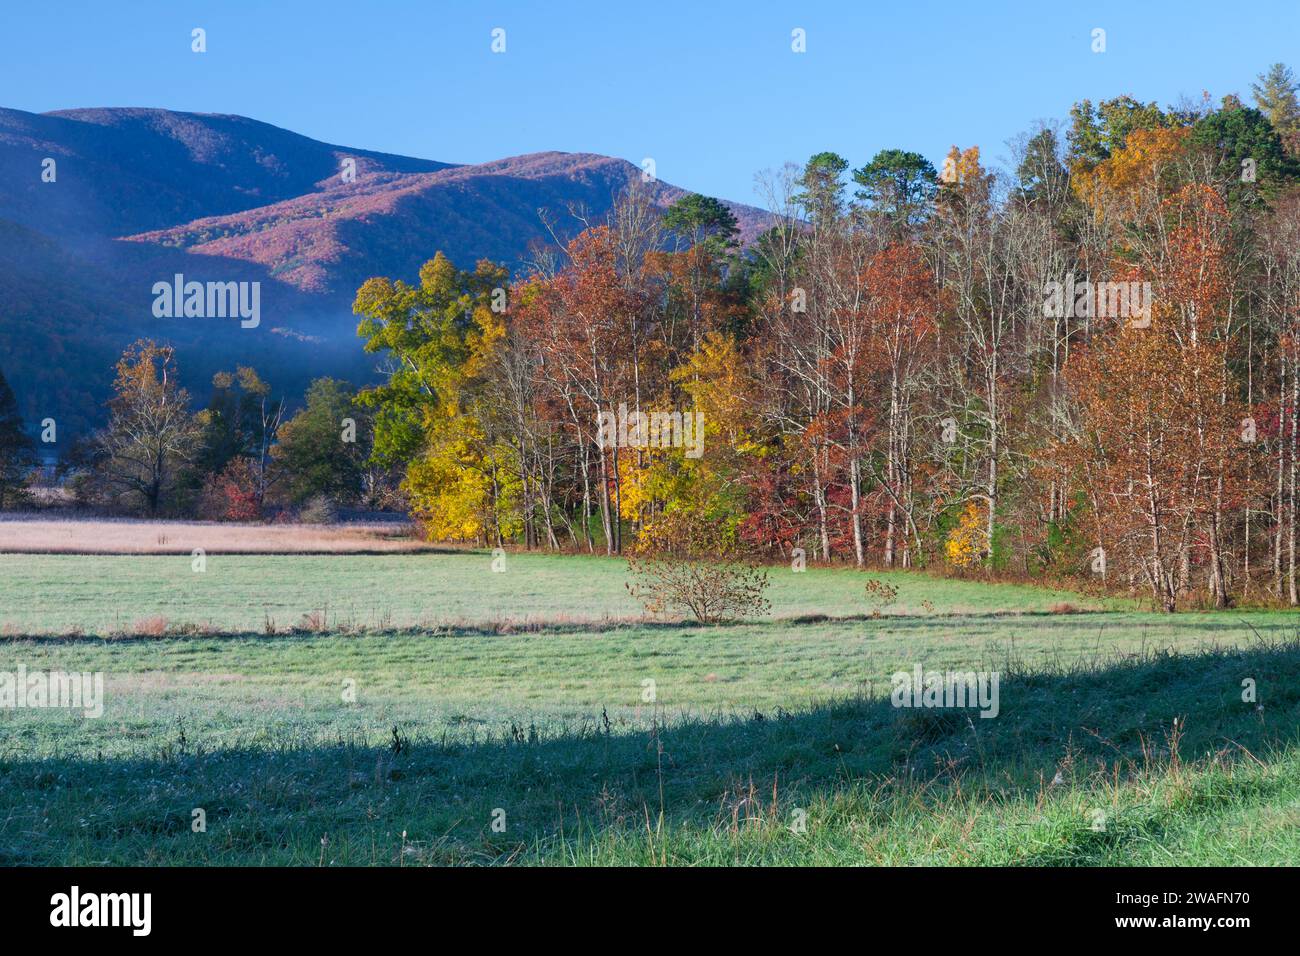 Autumn in Cades Cove in the Great Smoky Mountains National Park Stock Photo